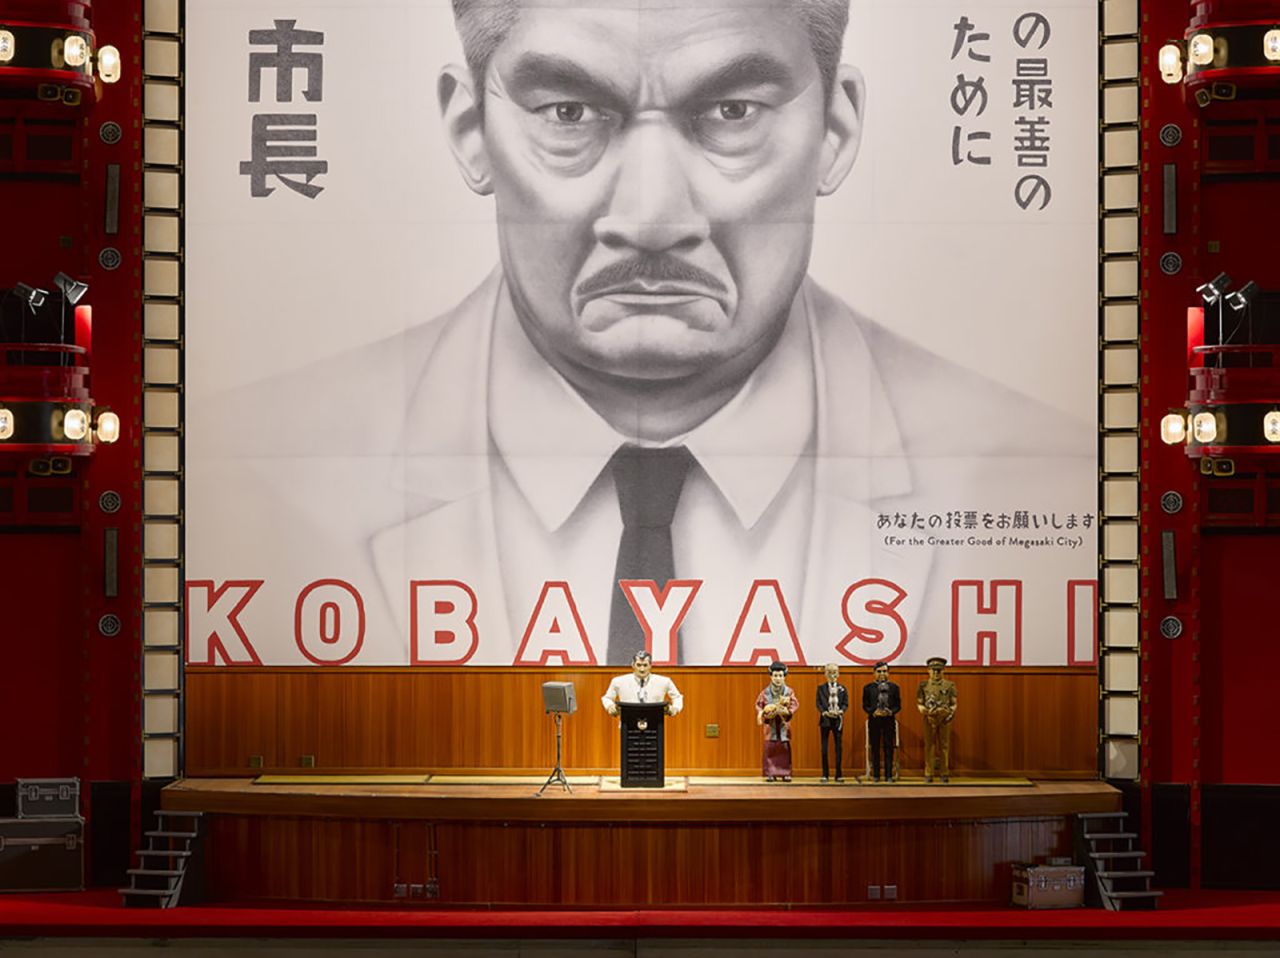 The stop-motion animation features an autocratic puppet mayor named Kobayashi.